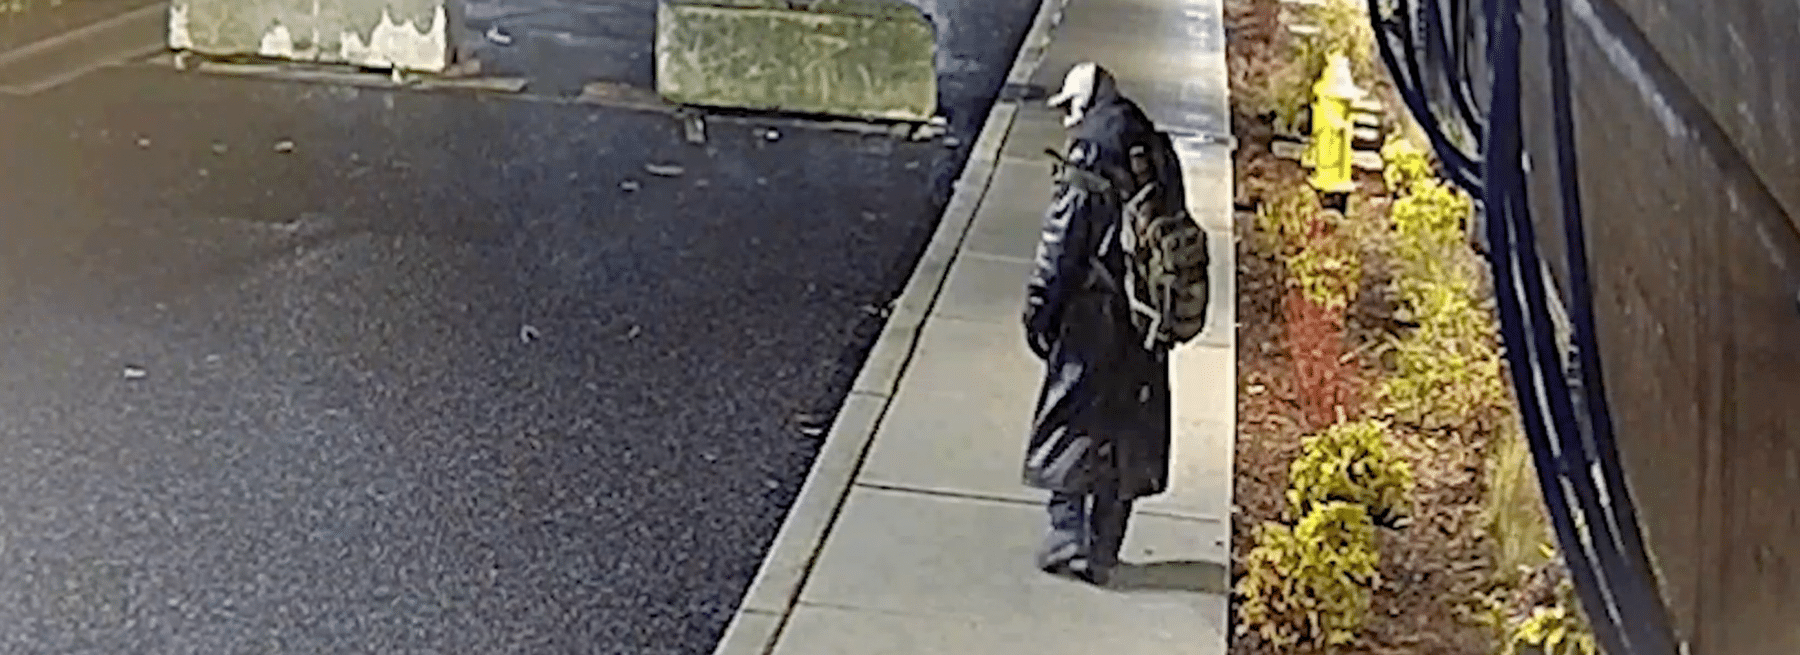 Trespasser in trench coat caught on construction site